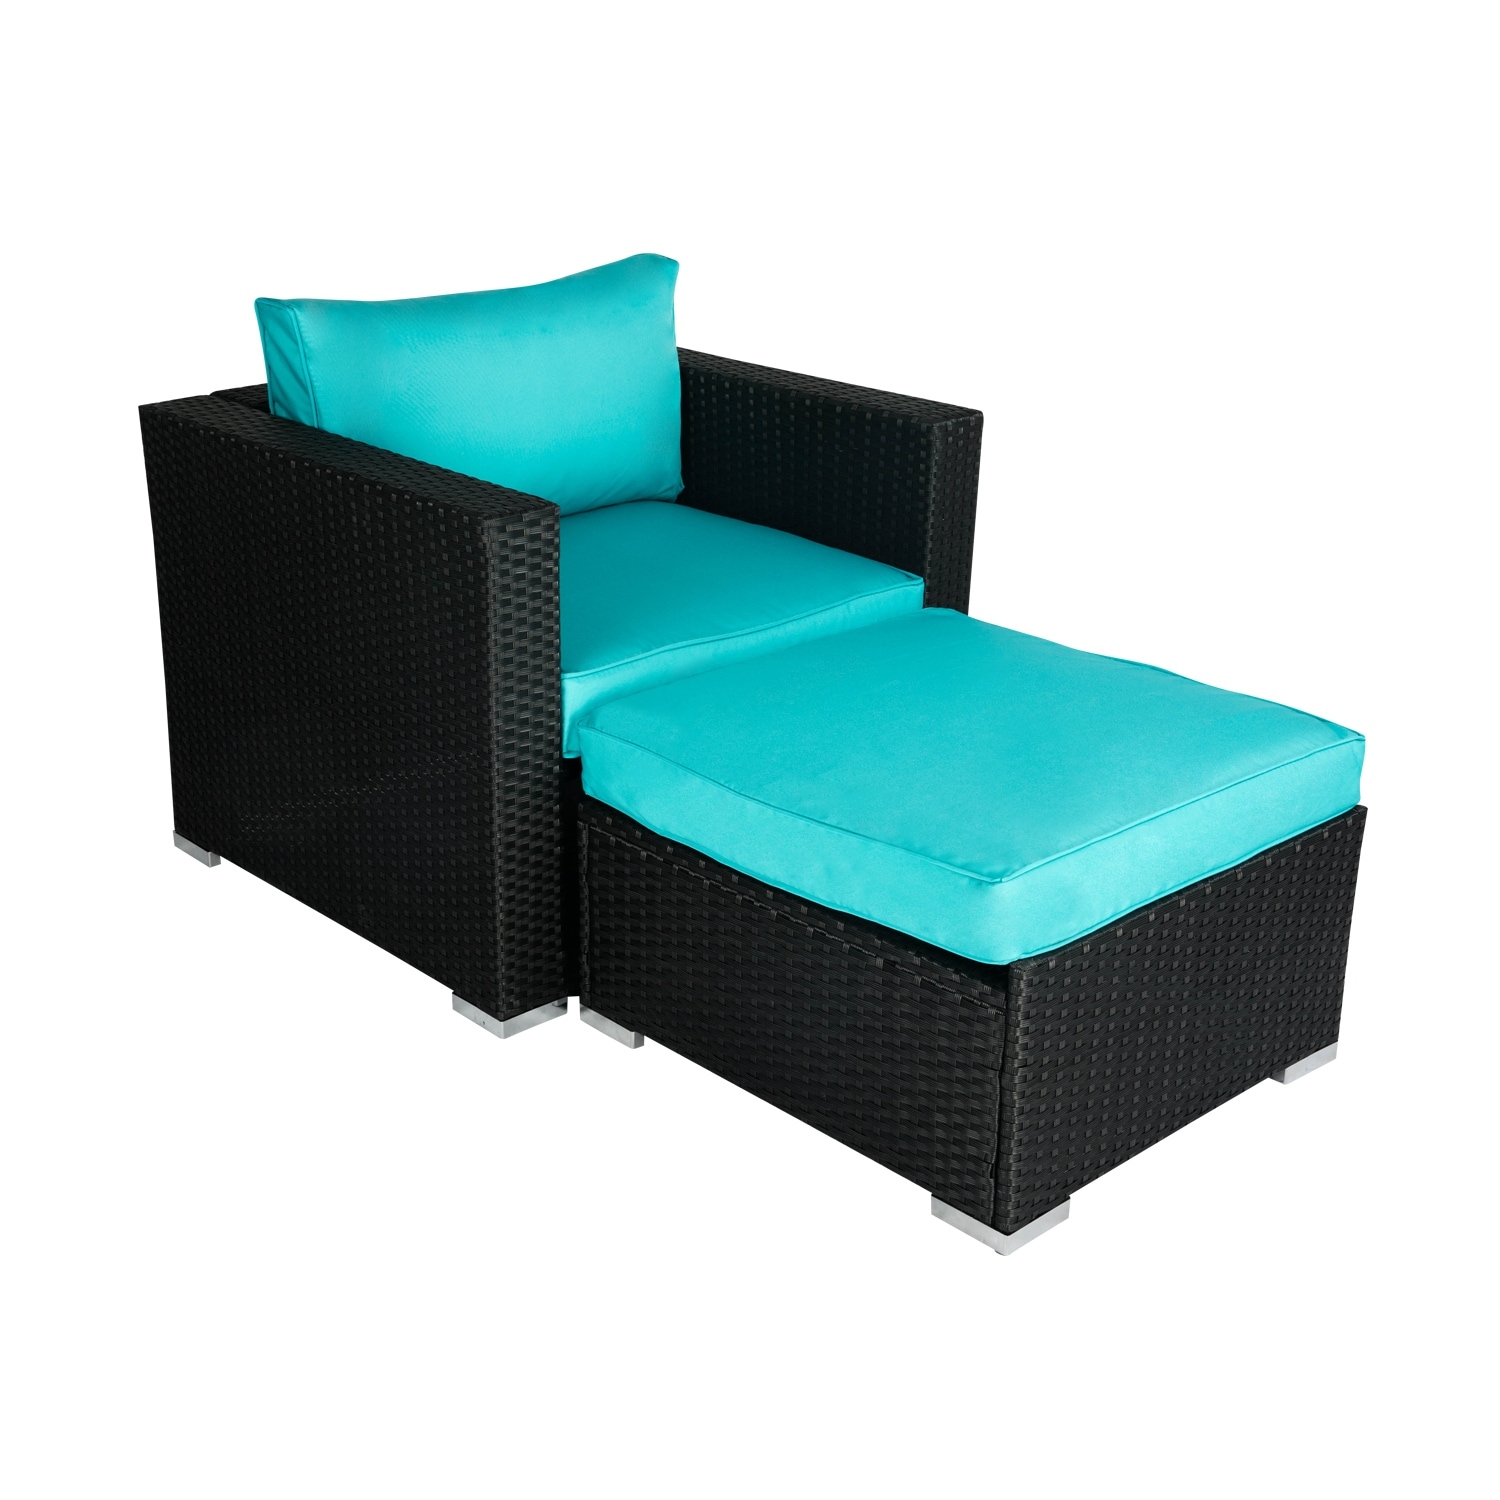 Havenside Home Kwan Wicker Chairs With Ottoman Patio Set